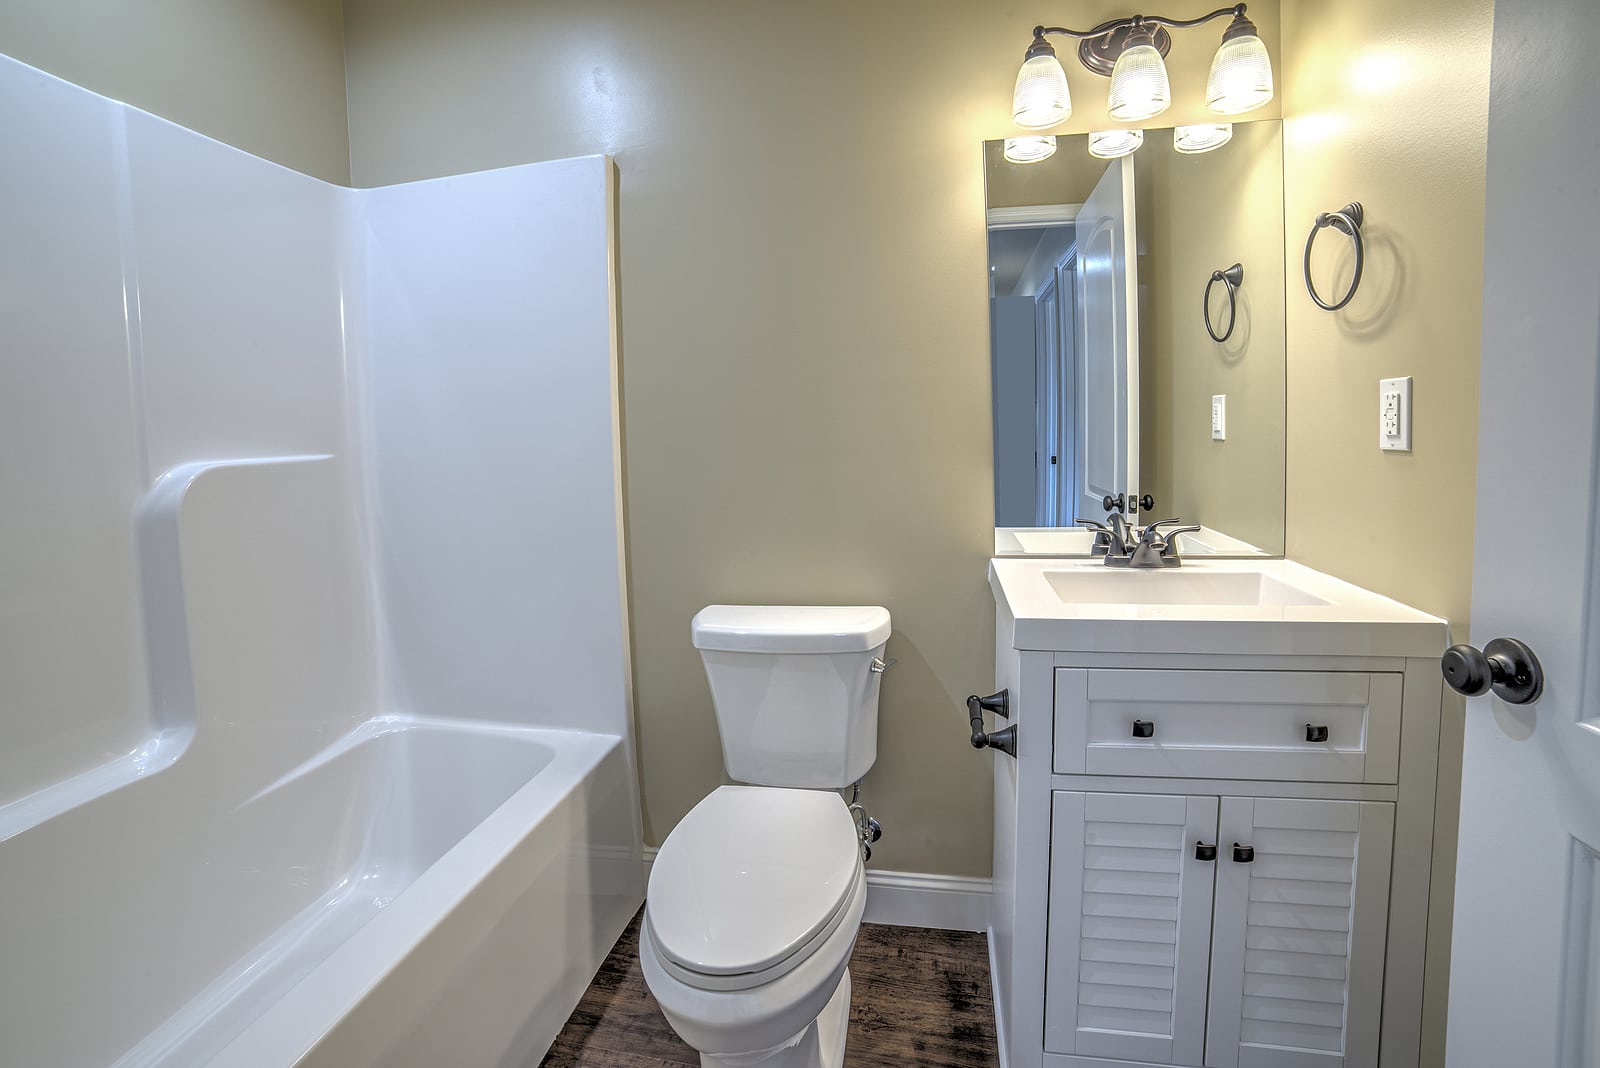 What You Should Know About Bathtub Liners